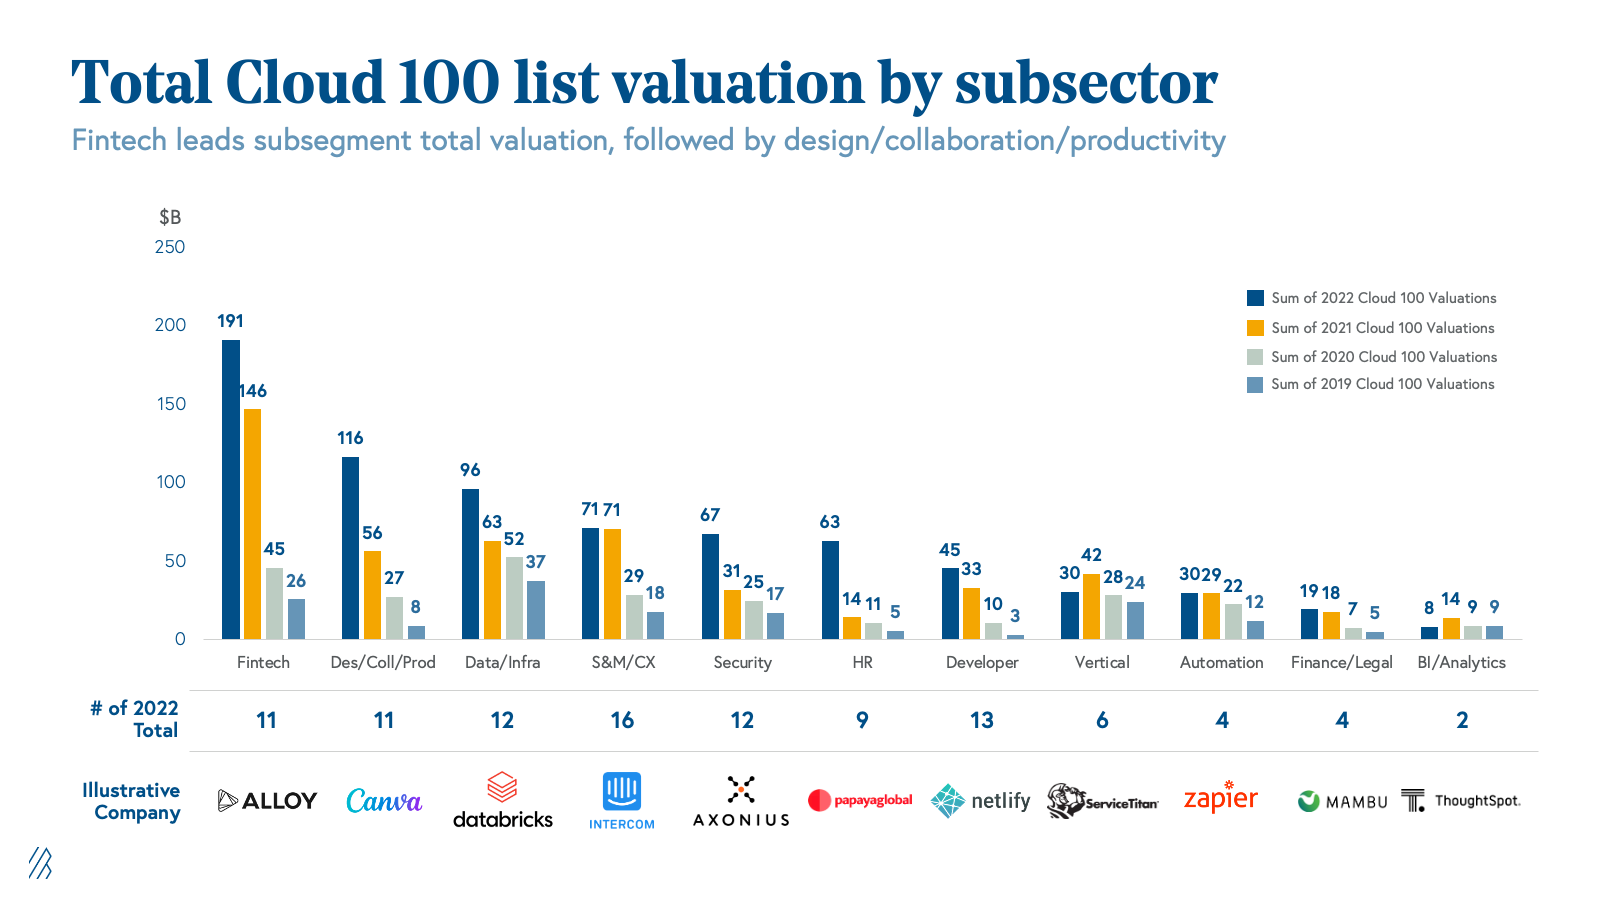 Total Cloud 100 list valuation by subsector